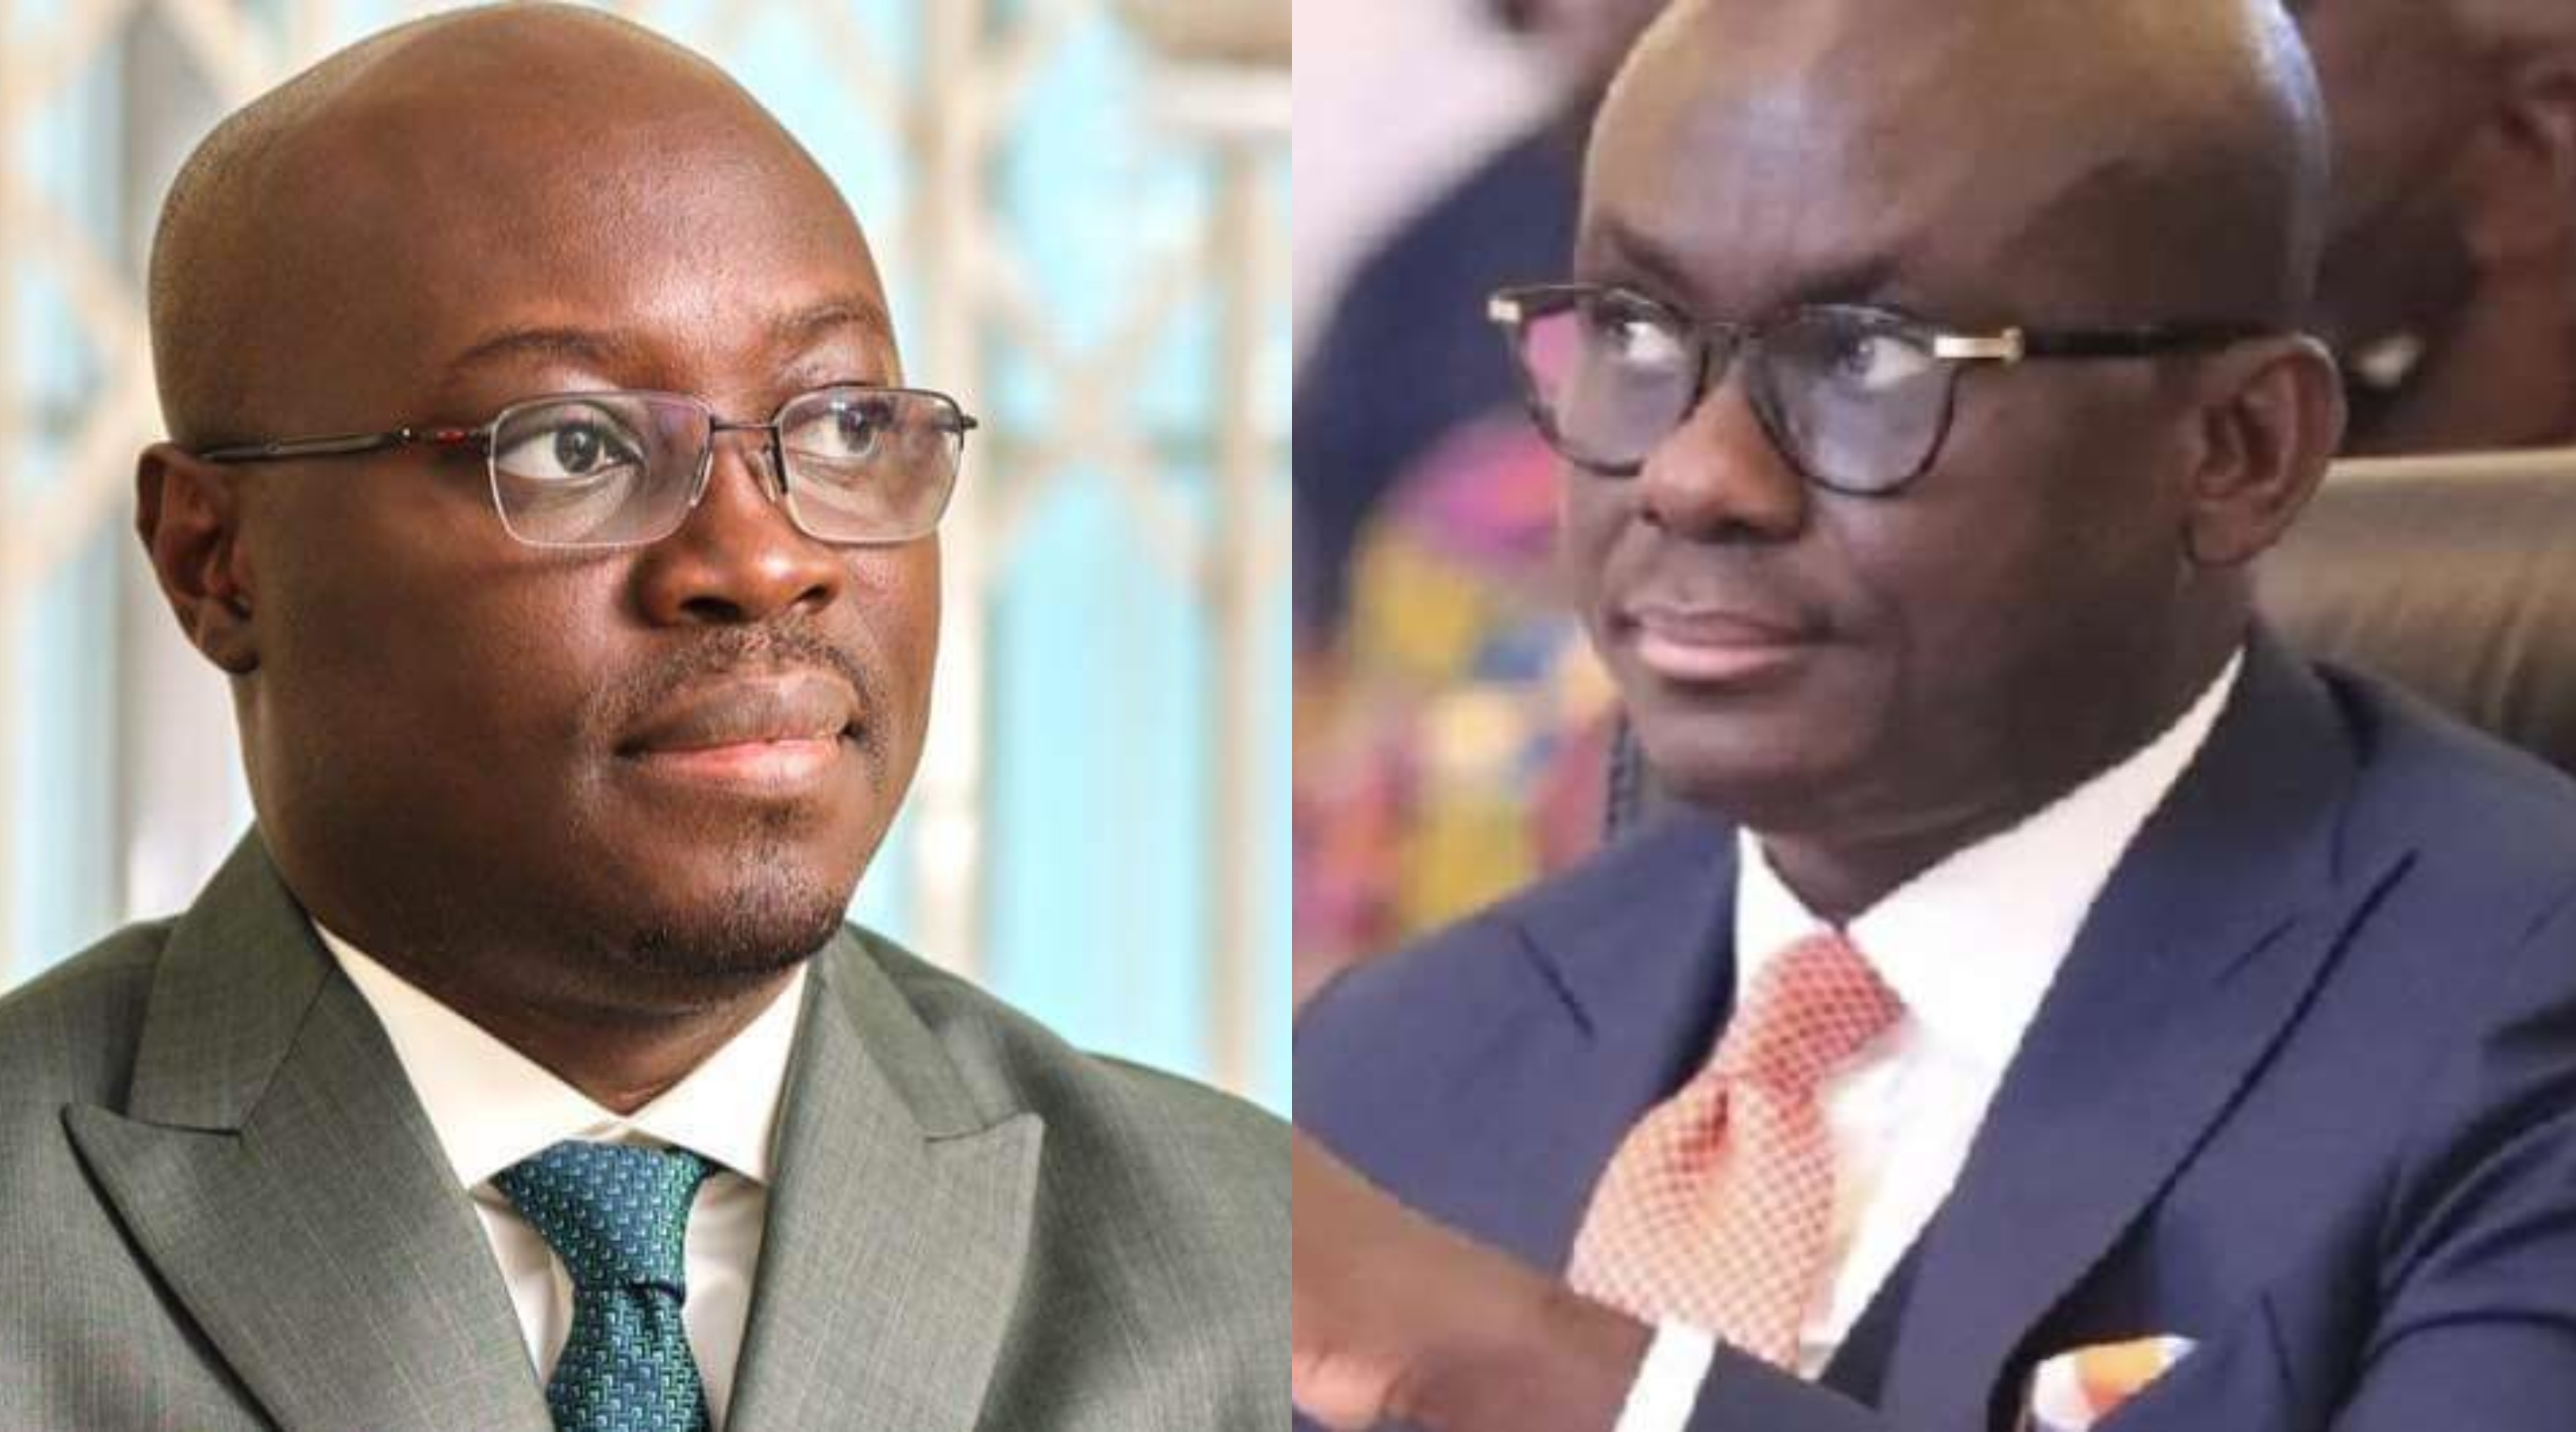 Ambulance case: Gofred Dame asked me to incriminate Ato Forson - Witness reveals